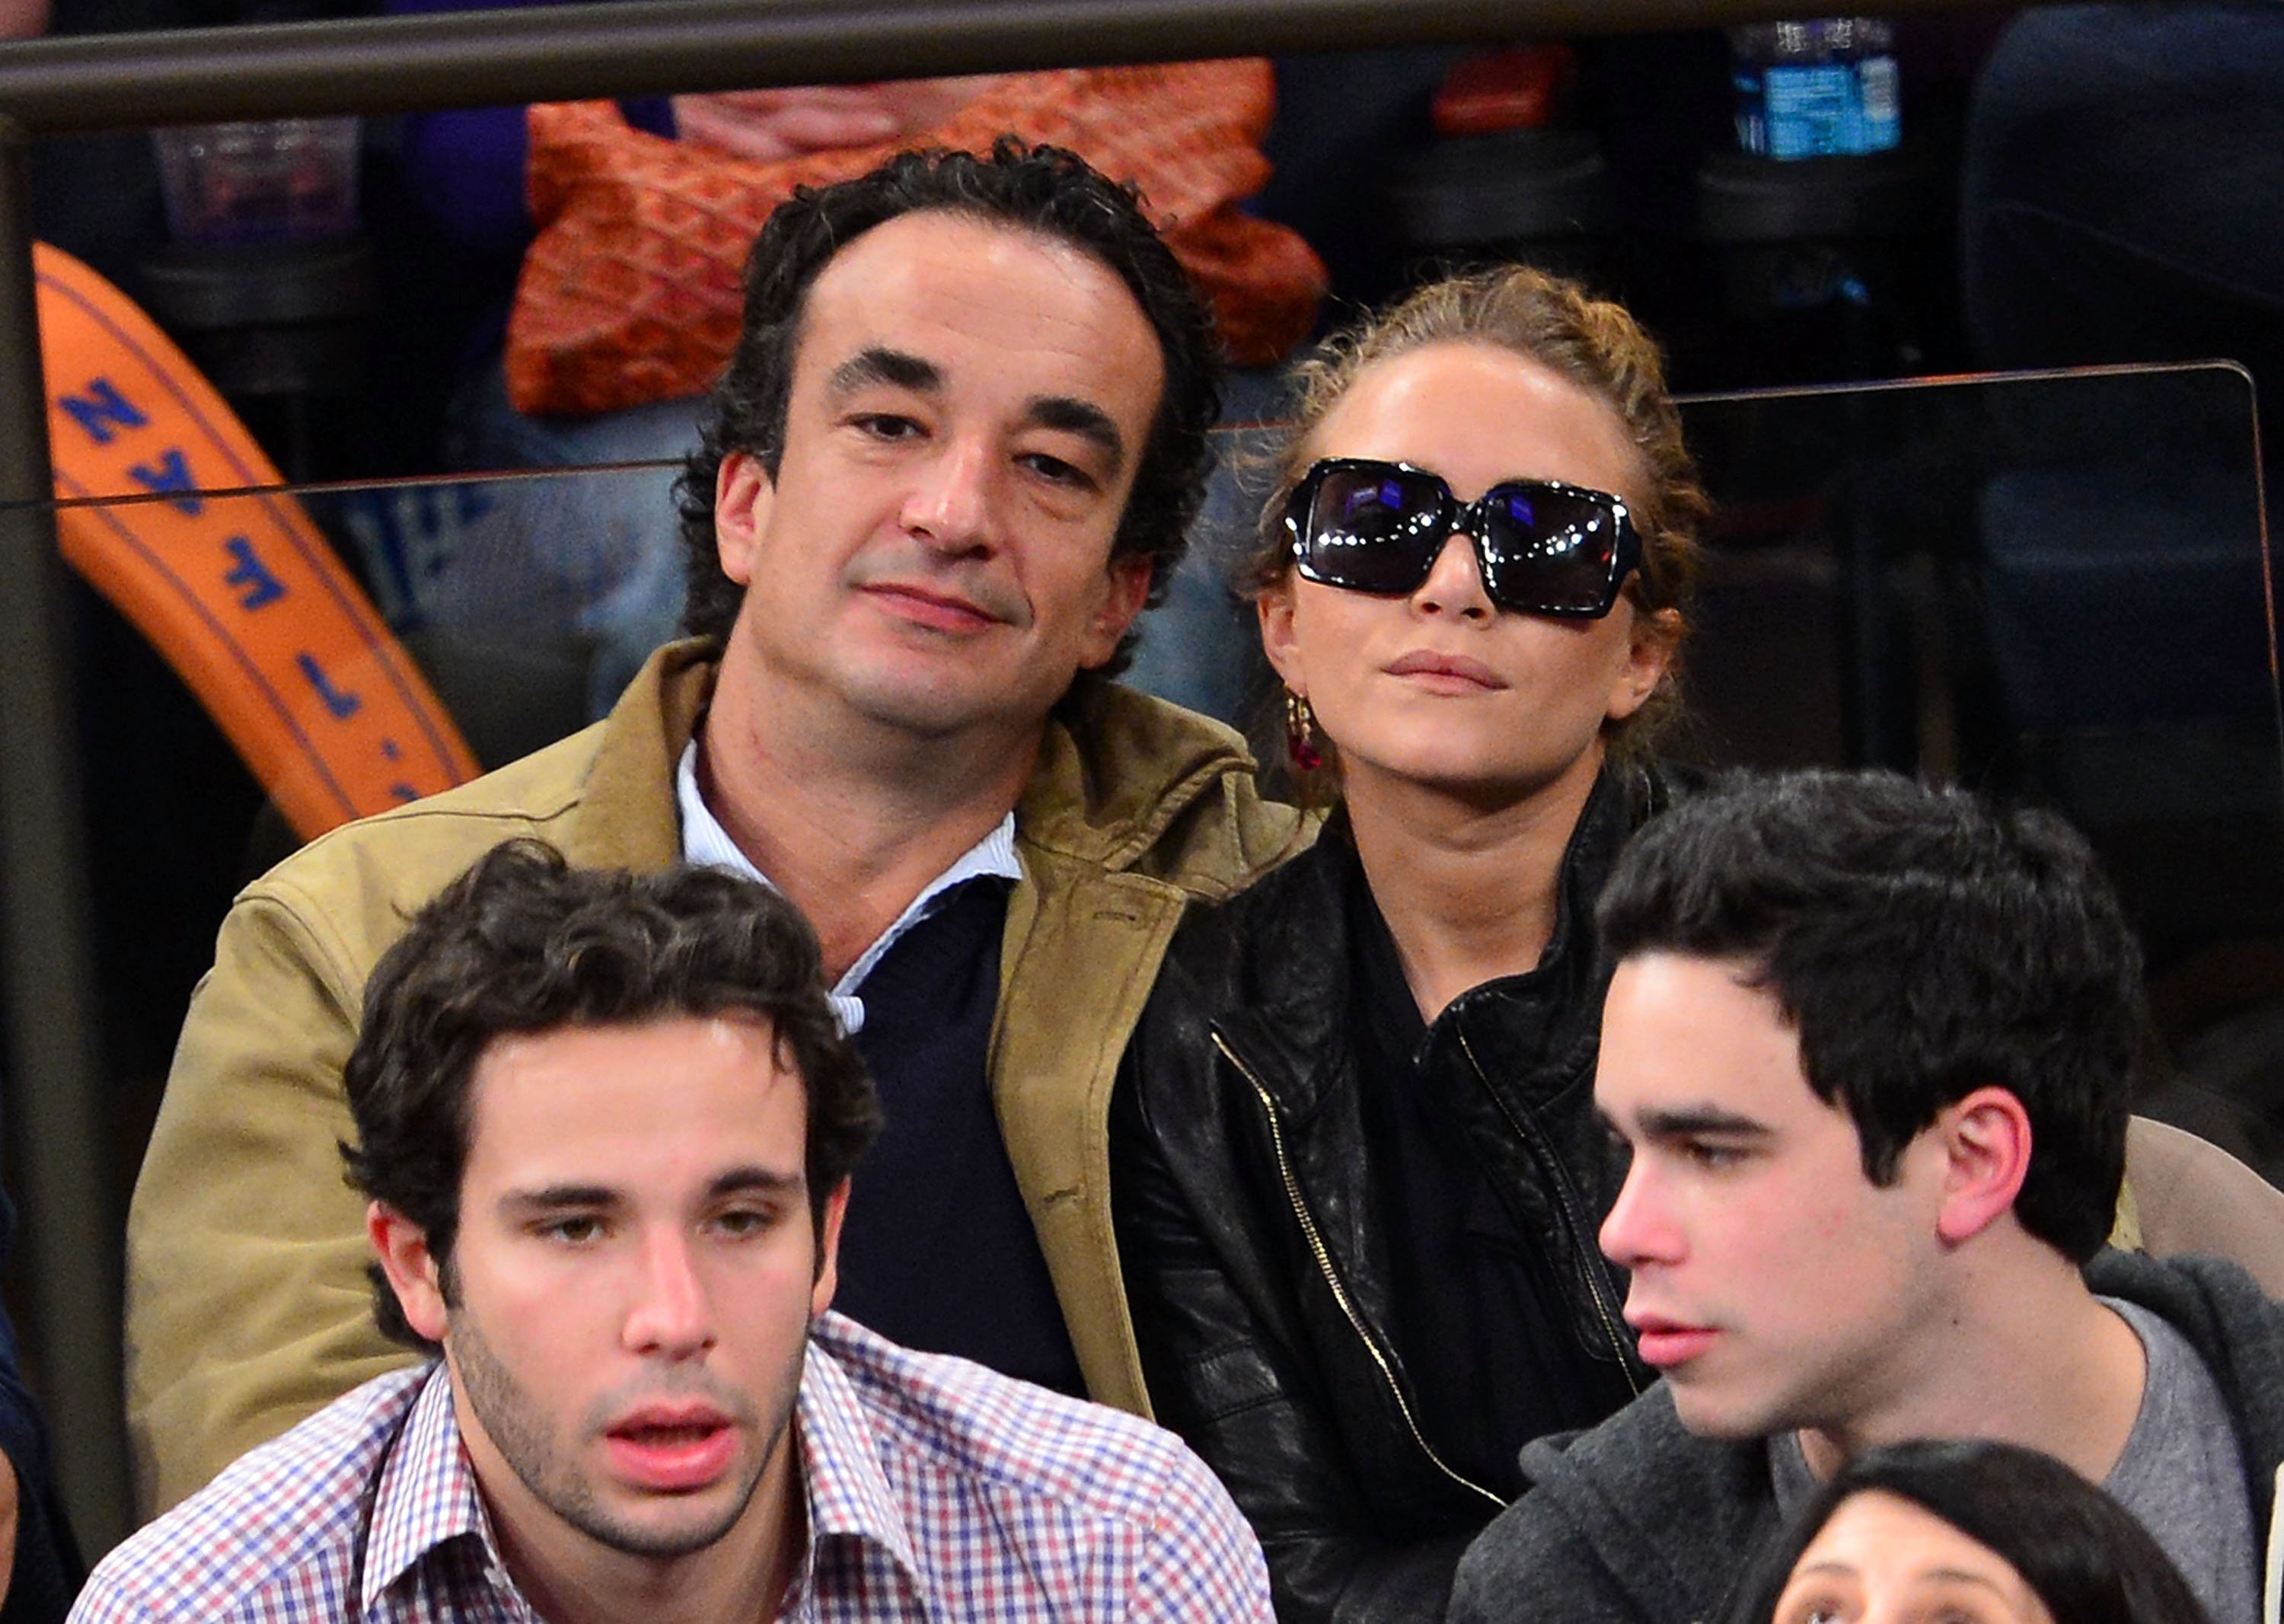 Olivier Sarkozy and Mary-Kate Olsen during New York Knicks verse Indiana Pacers game at Madison Square Garden on November 18, 2012 in New York City. / Source: Getty Images